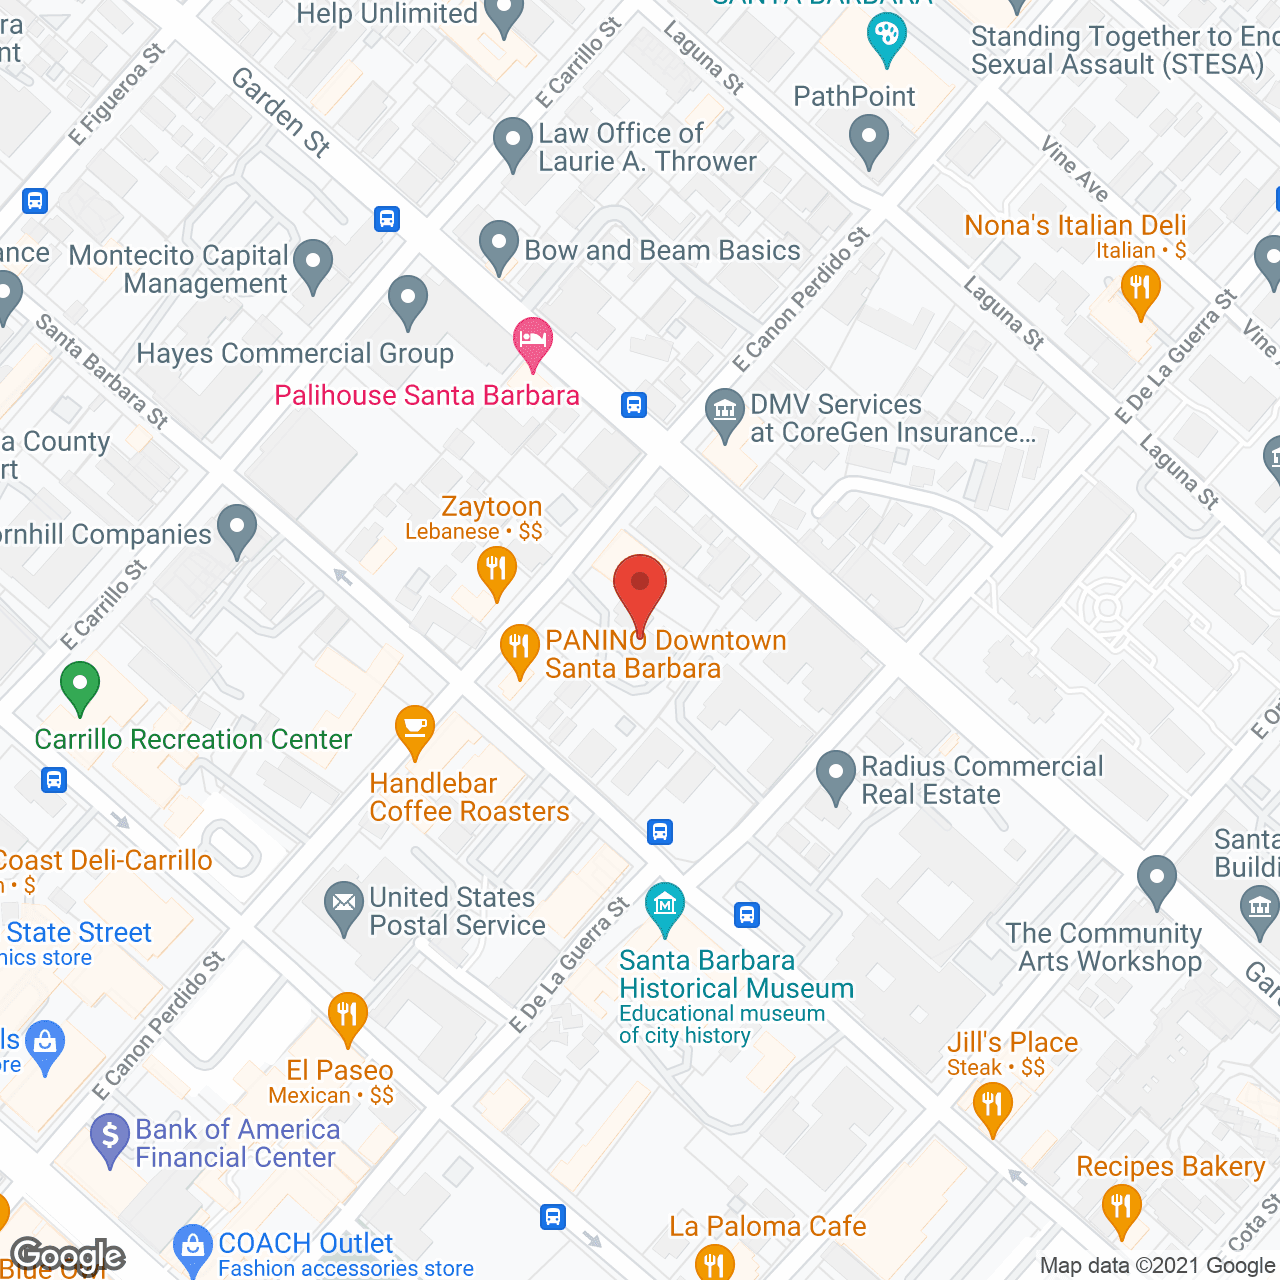 Visiting Care & Companions in google map